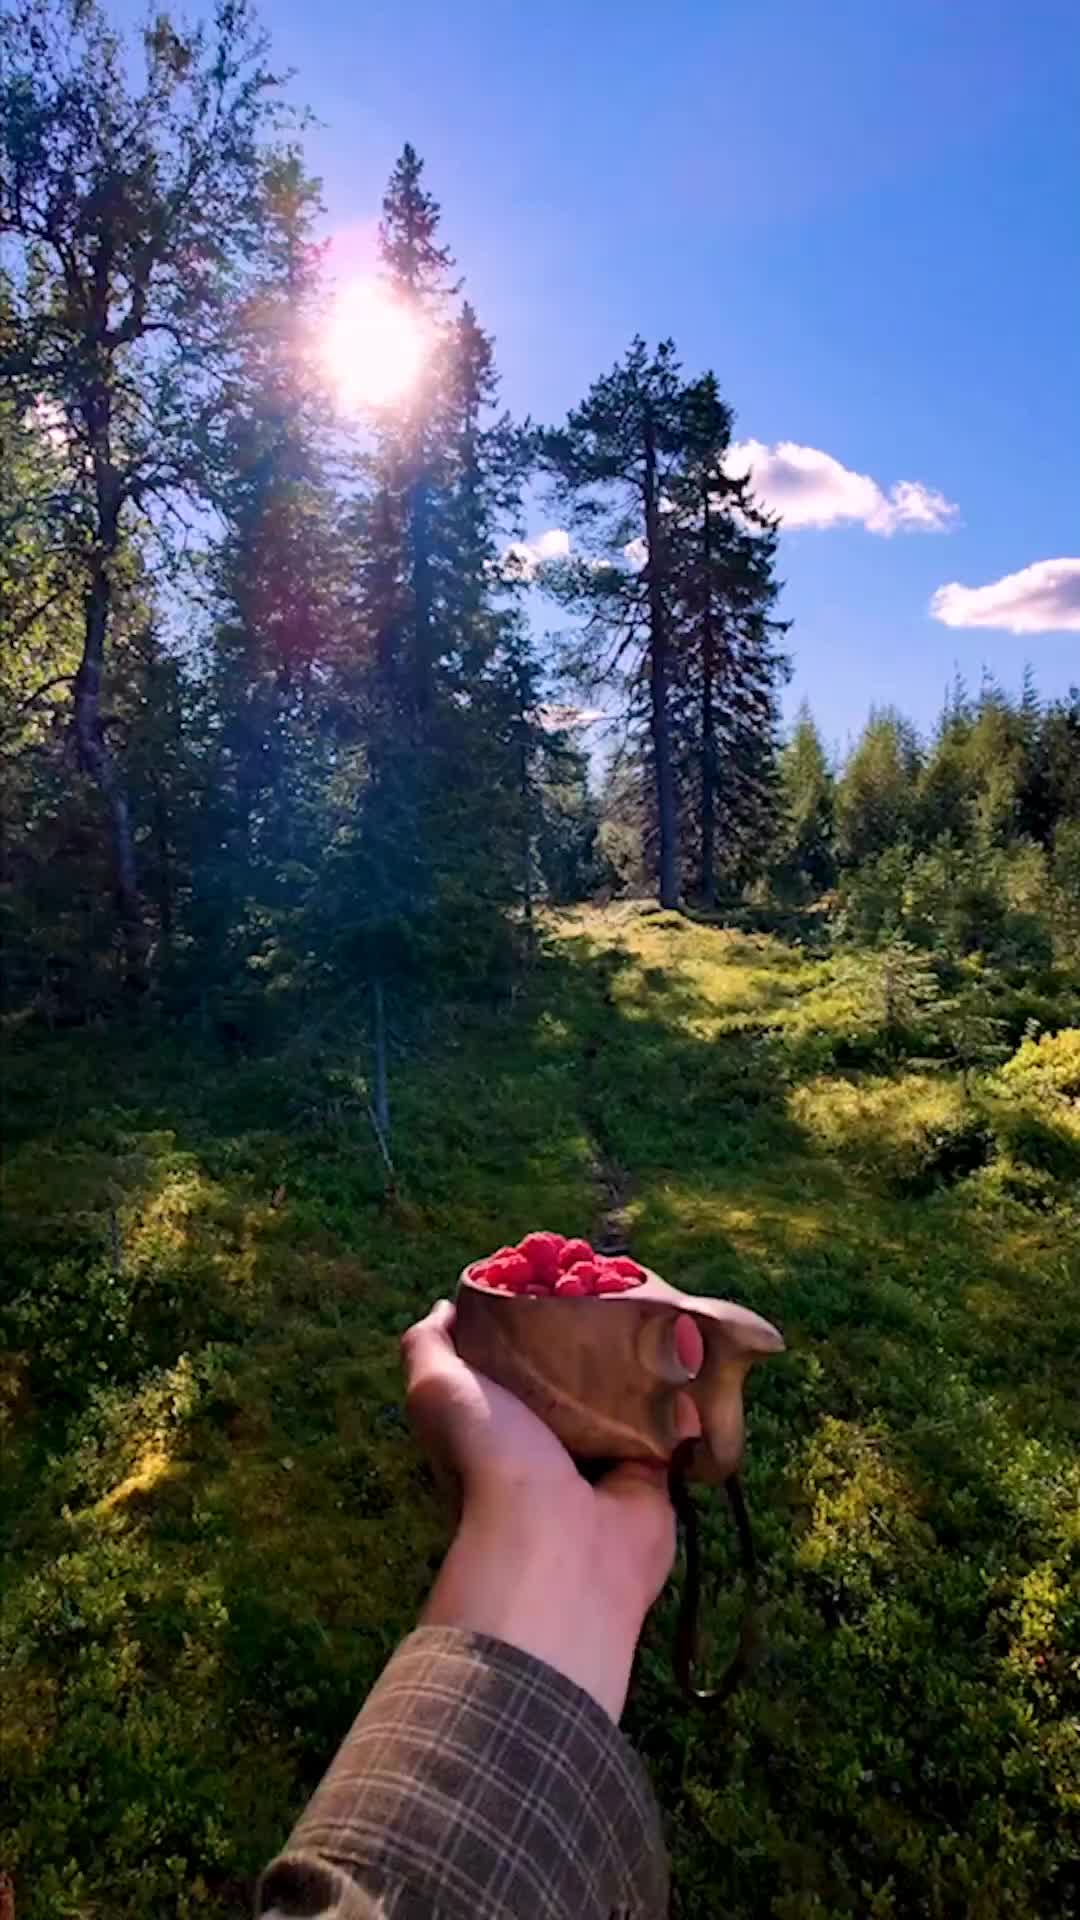 End of Berry Picking Season in Lapland, Finland